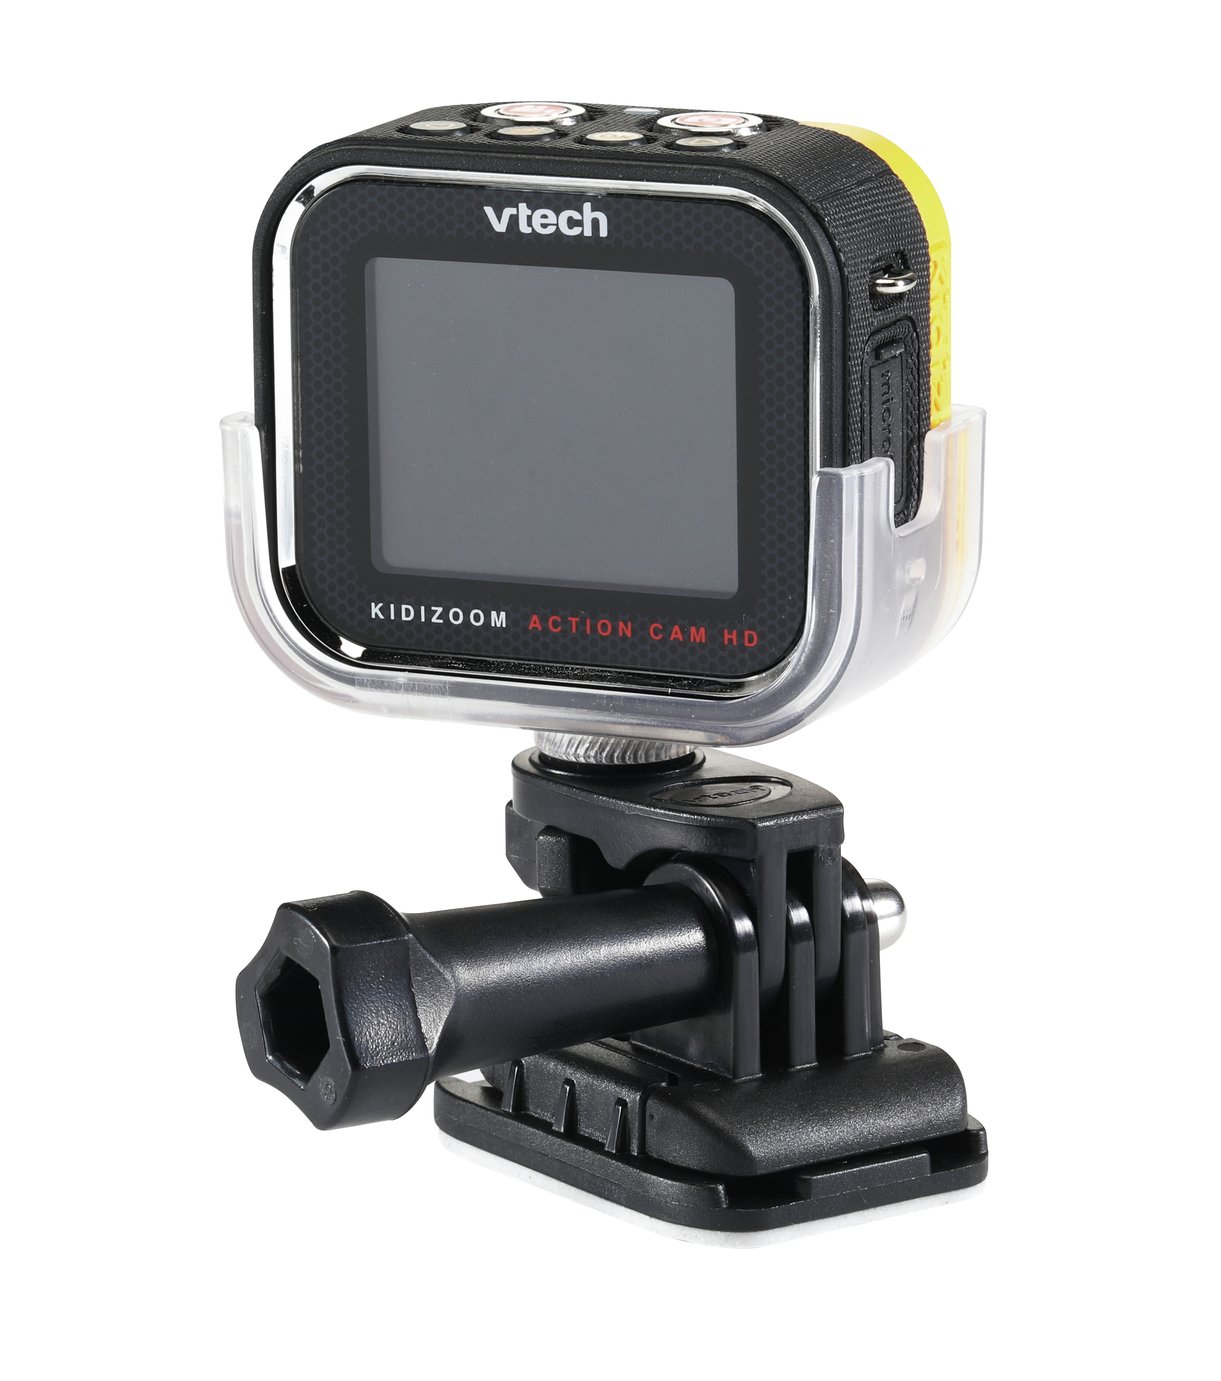 VTech Kidizoom Action Cam  HD Review